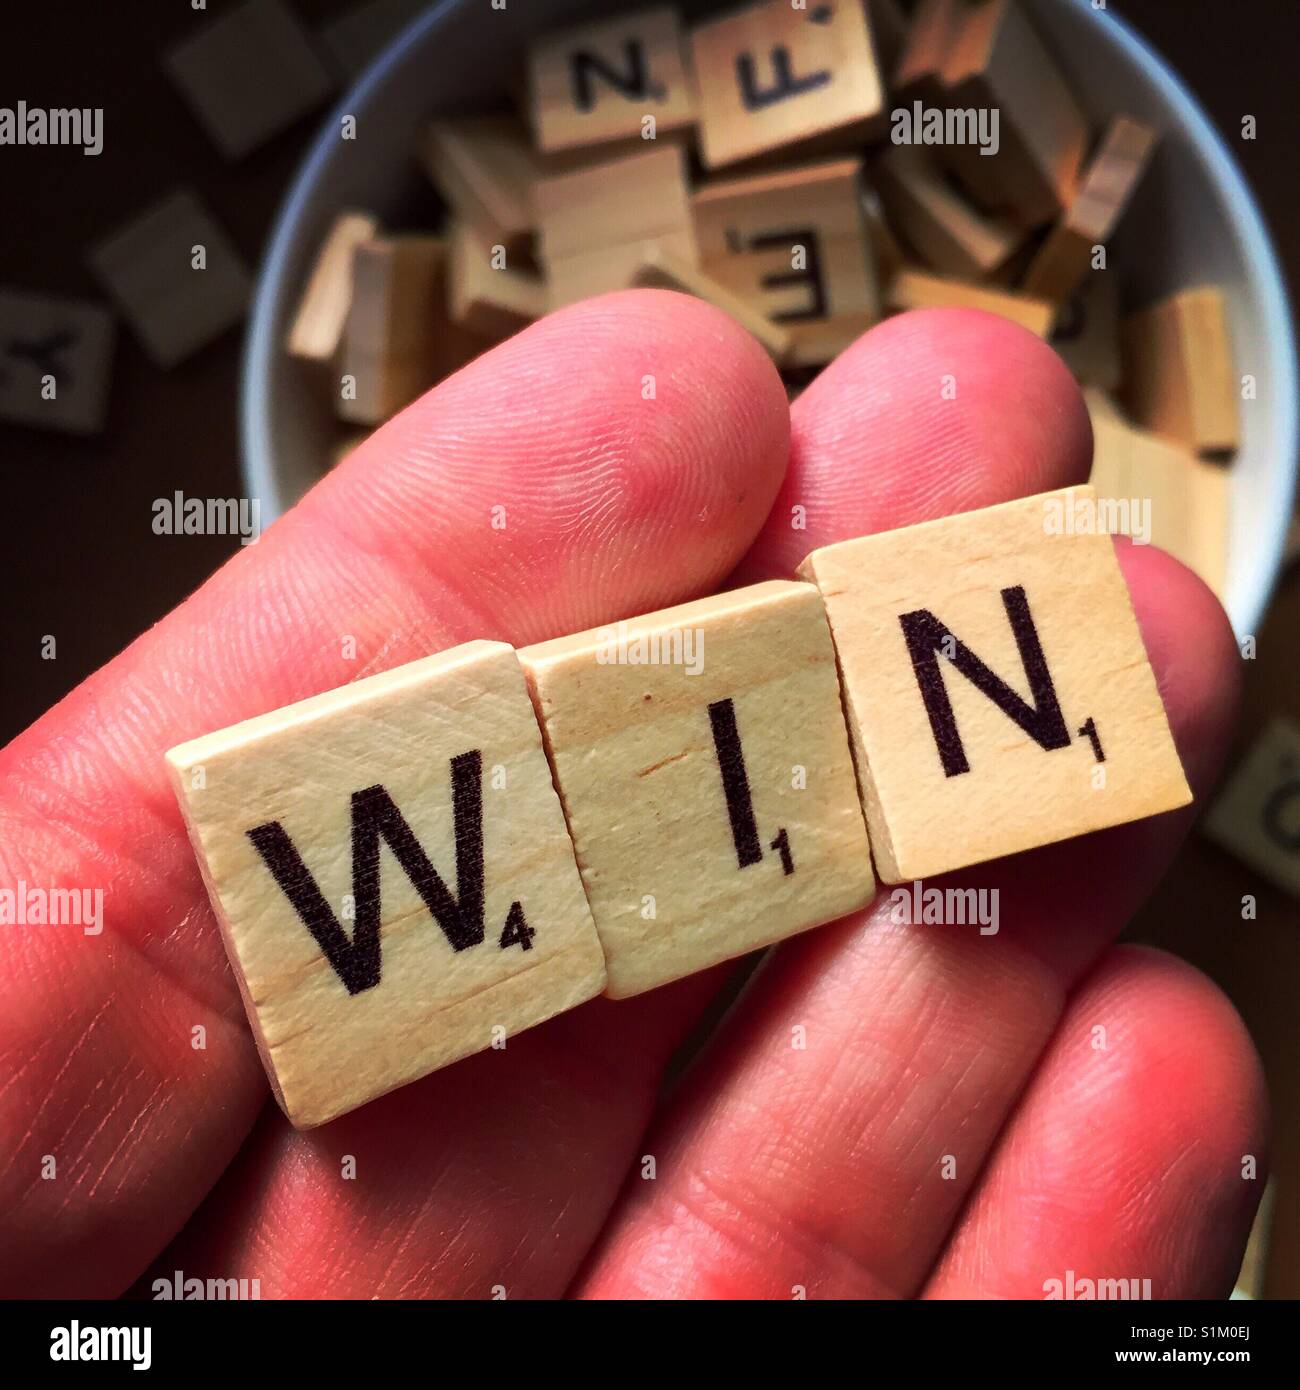 A close up shot of a man's hand holding wooden letters spelling win with other wooden letters in the background Stock Photo